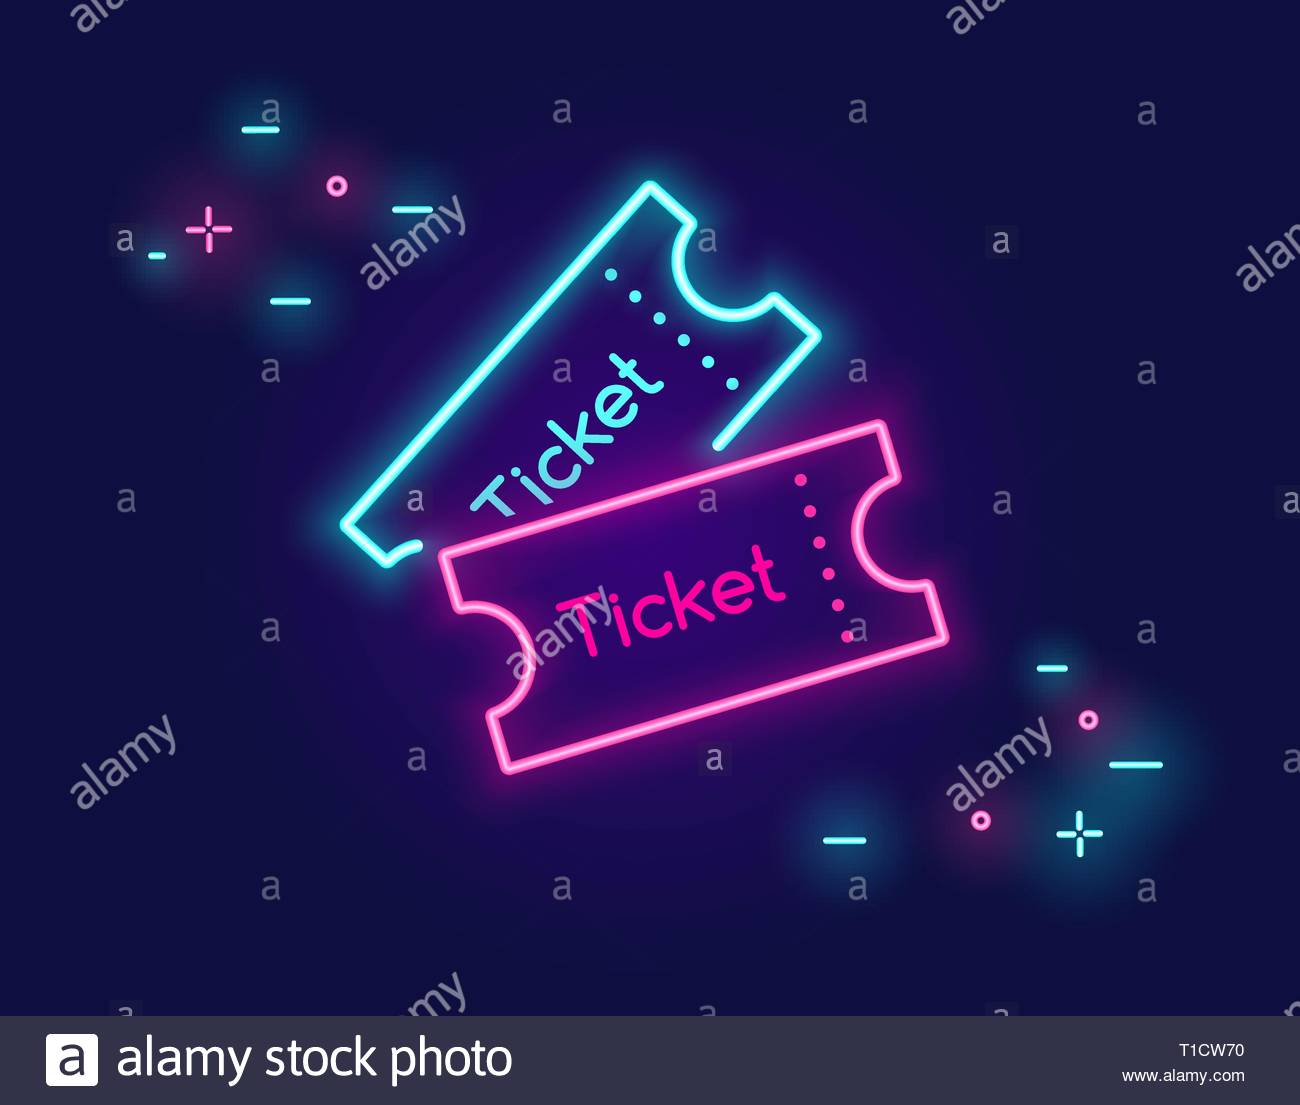 Two tickets banner for social networks in neon light style on dark